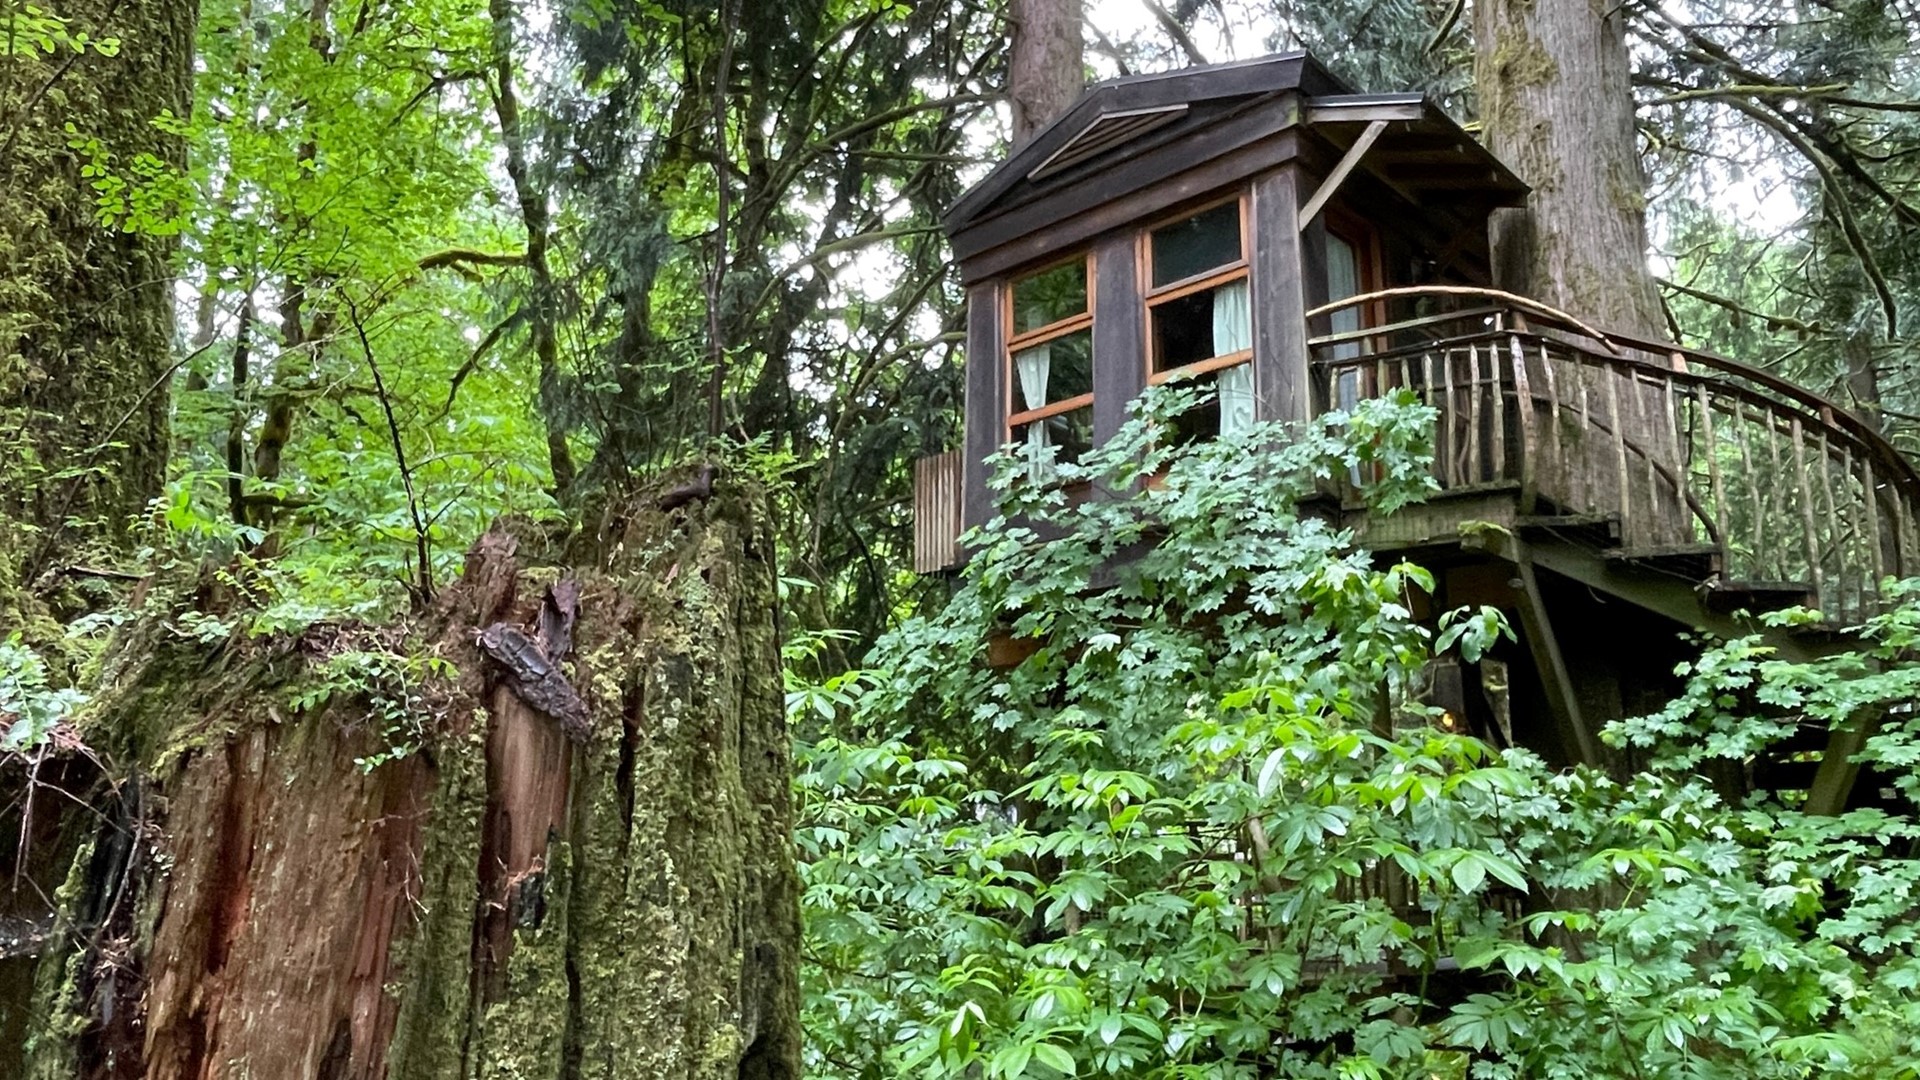 Since 2006, guests have enjoyed staying in the trees at TreeHouse Point. It's the winner of Best Quirky Hotel in 2023's Best Northwest Escapes. #k5evening